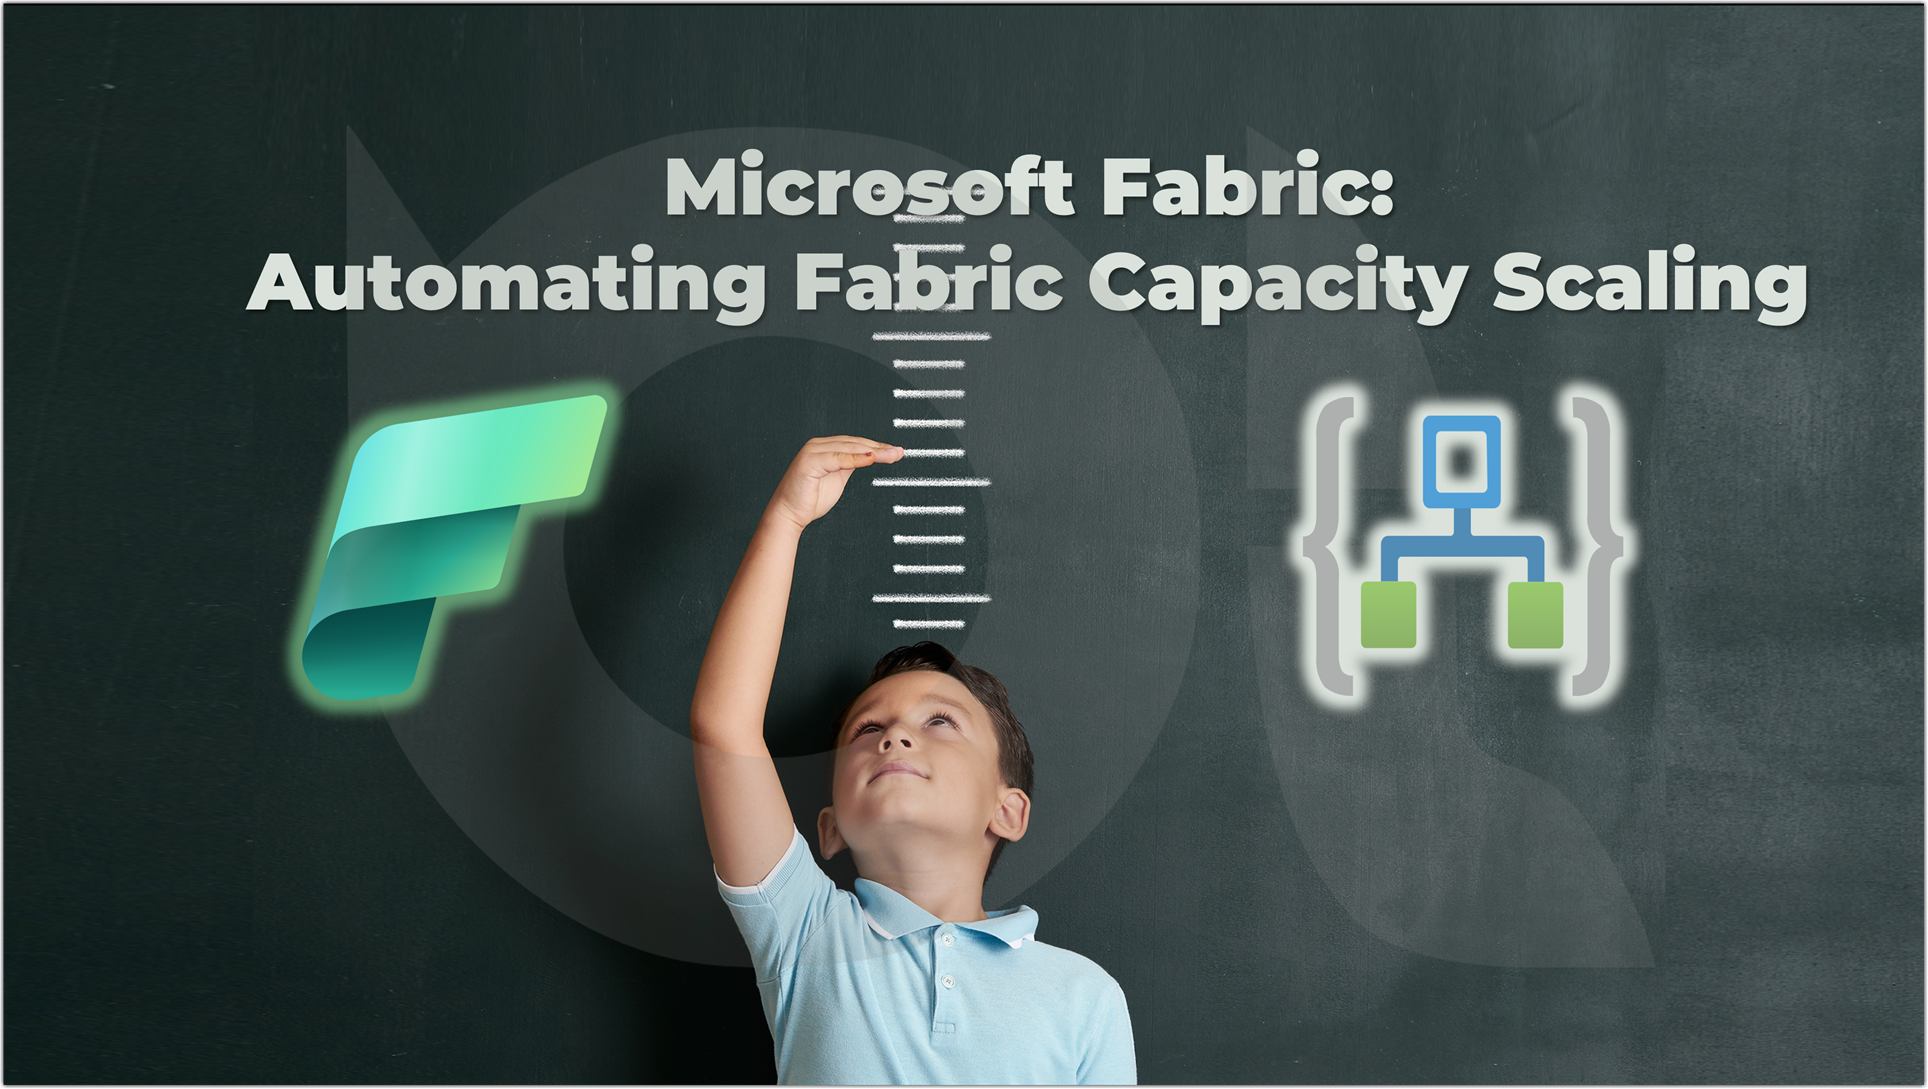 Microsoft Fabric: Automating Fabric Capacity Scaling with Azure Logic Apps